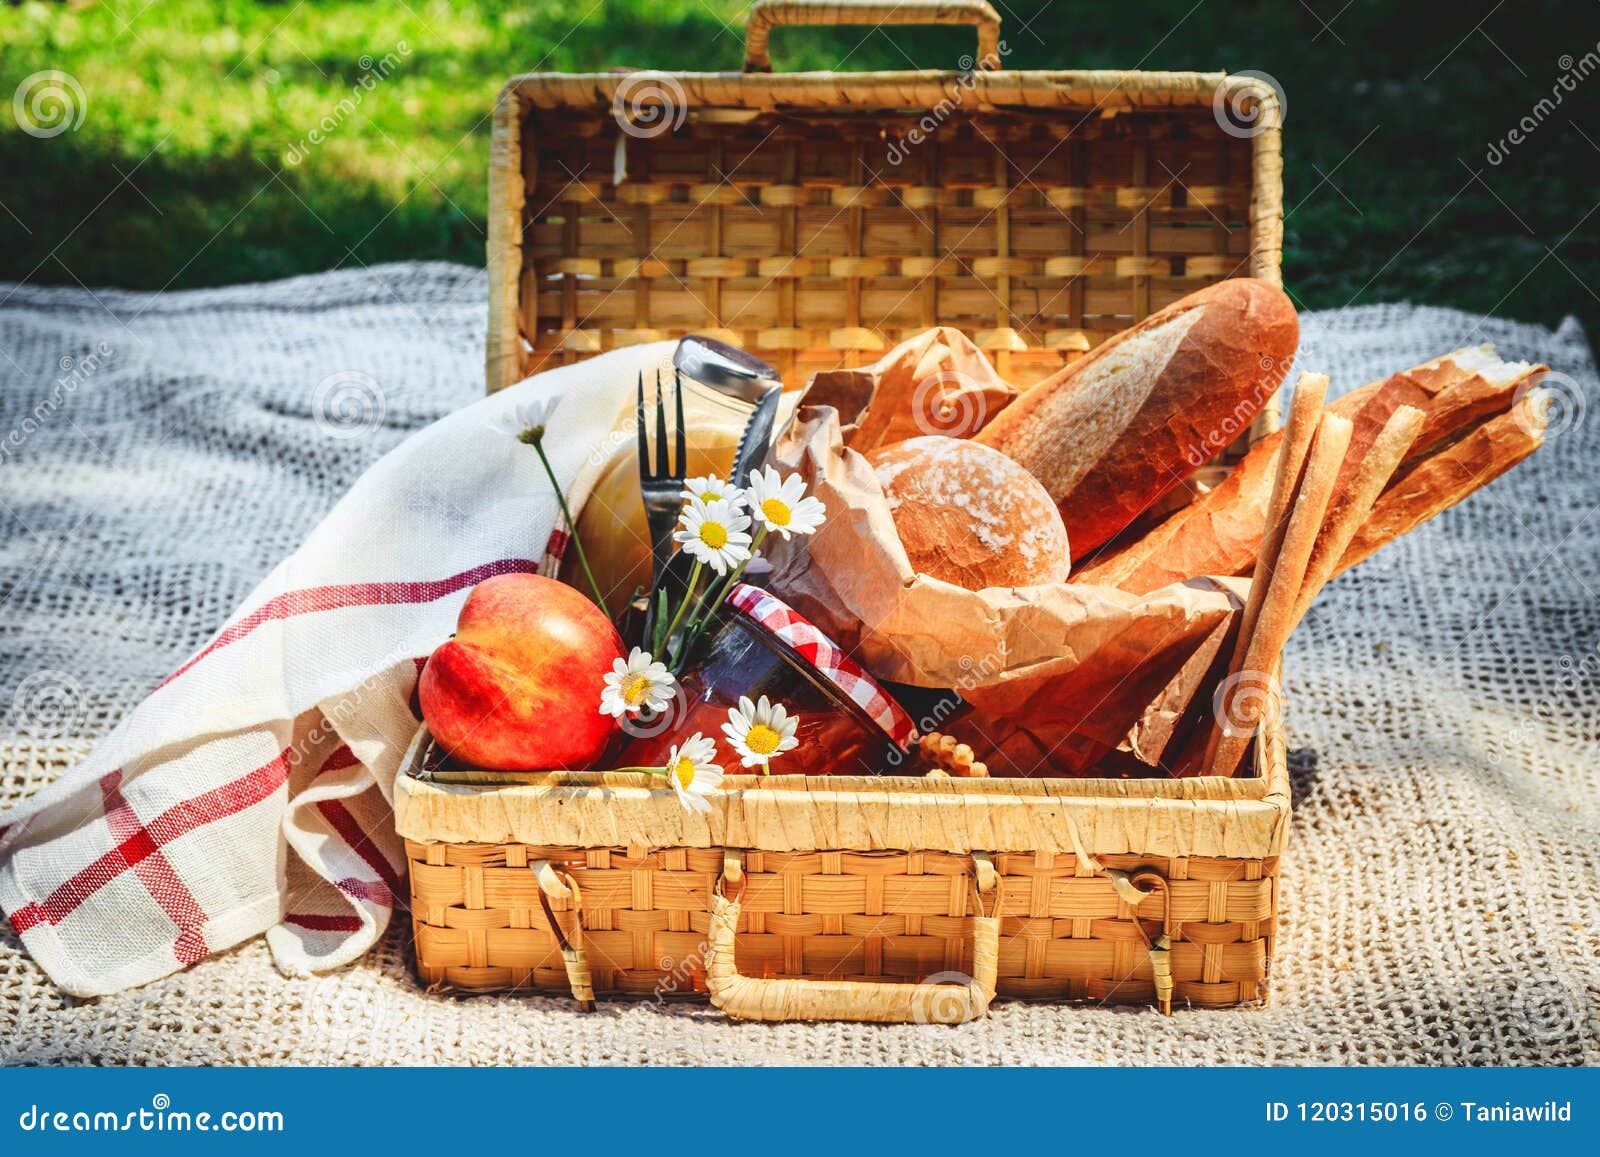 Picnic Basket Filled Fruit , Bread and Jar with Apricot Jam Stock Photo Image of healthy, apple: 120315016